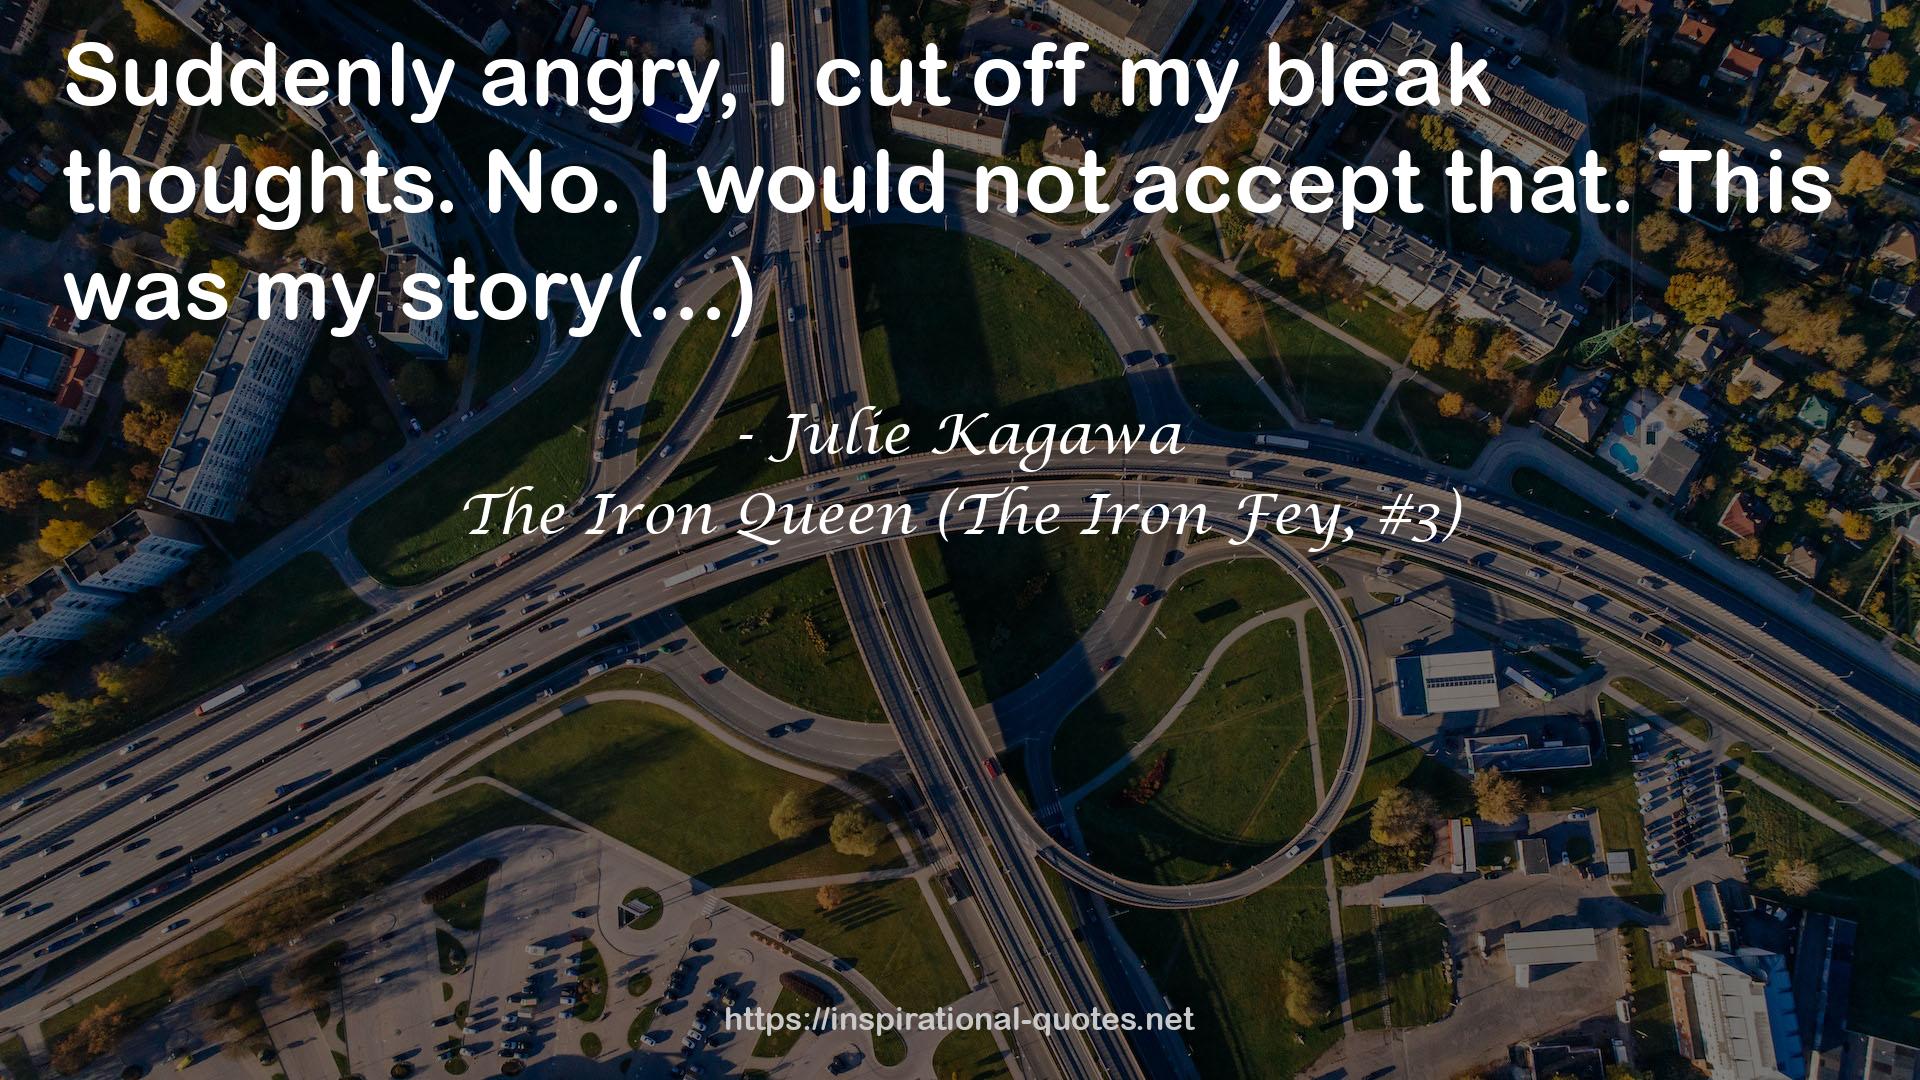 The Iron Queen (The Iron Fey, #3) QUOTES